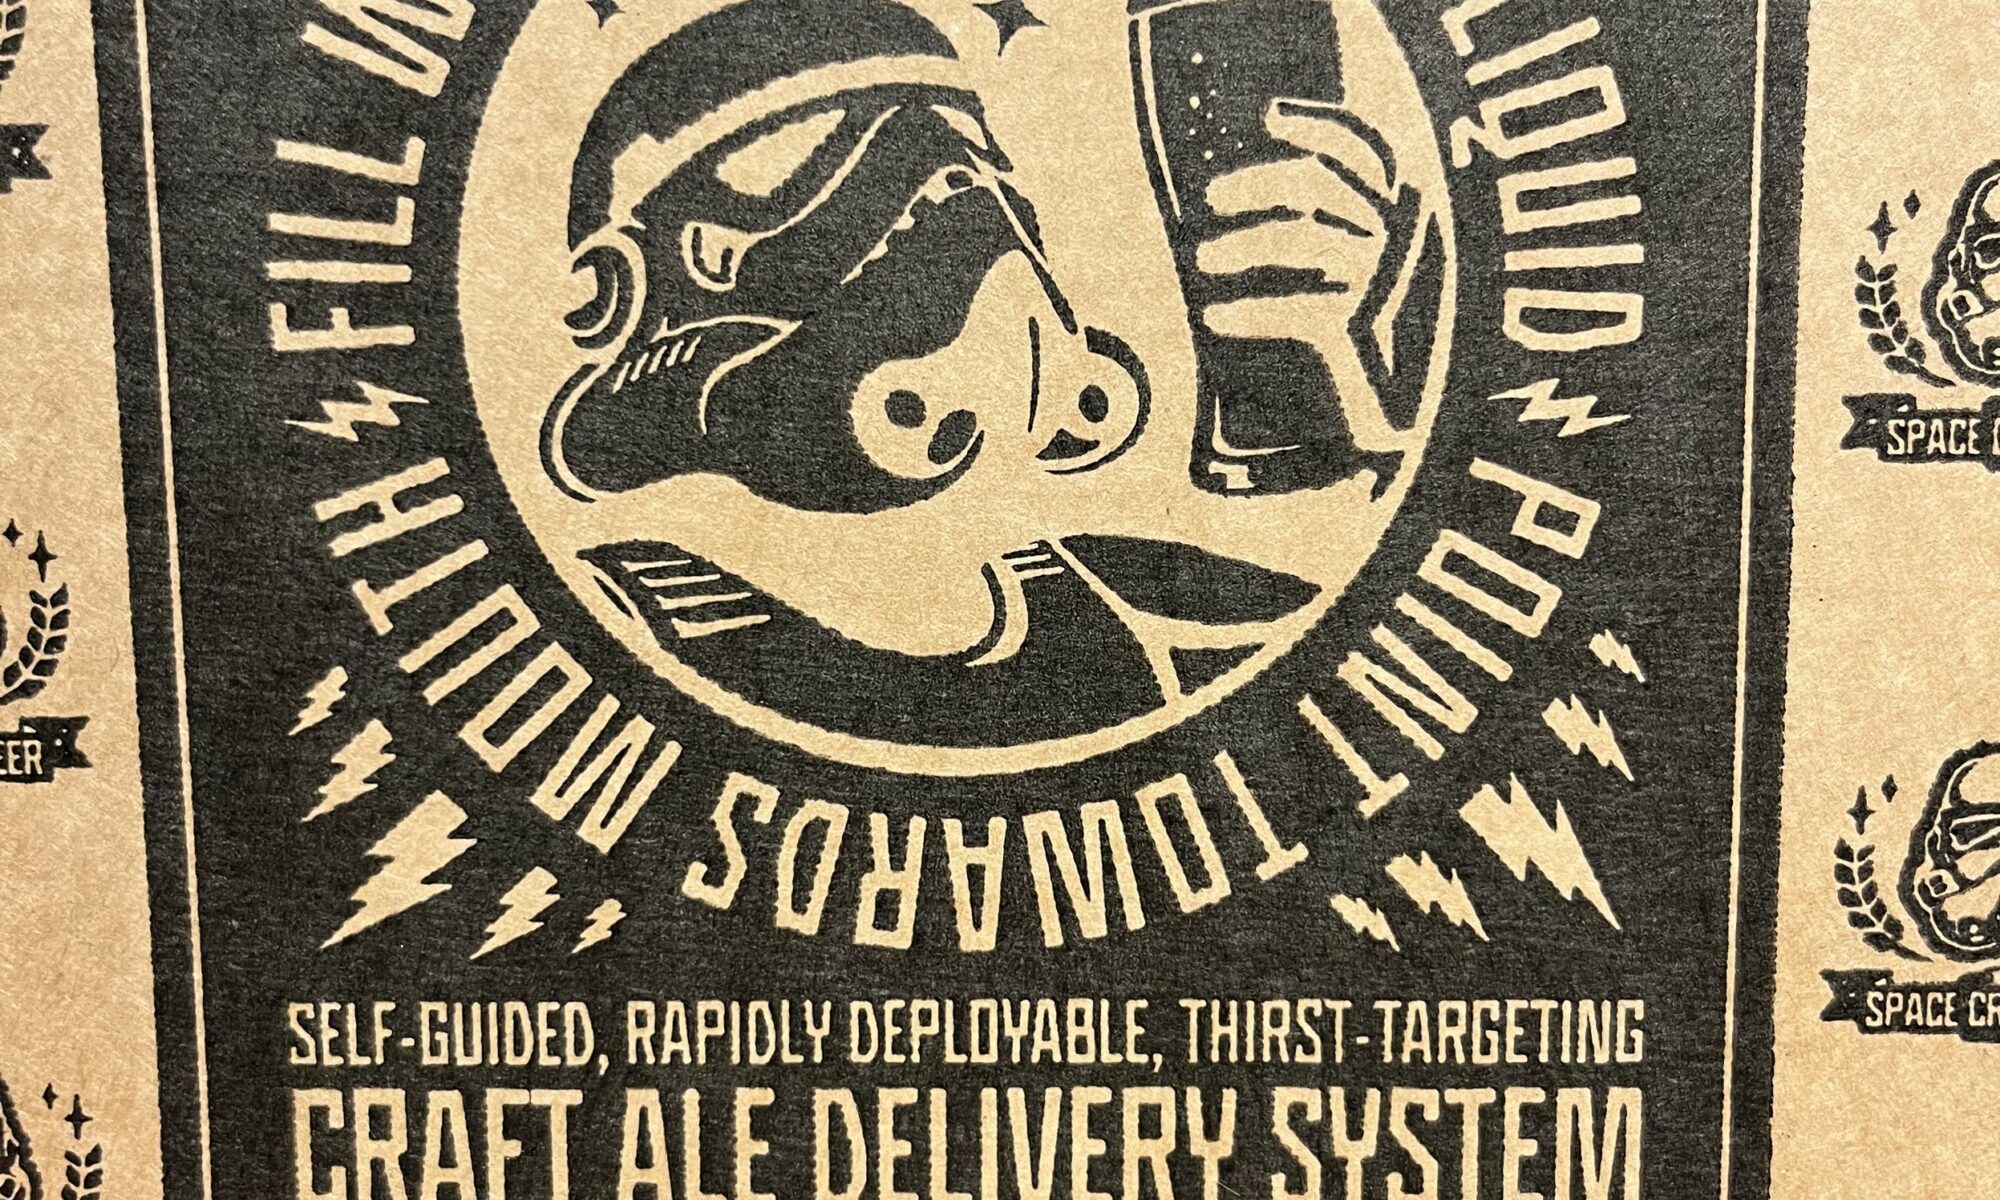 Picture of the box from a star-wars-themed craft ale kit. Features a graphic of a storm trooper holding a beer glass and the motto “Fill with aim-retarding liquid. Point towards mouth”